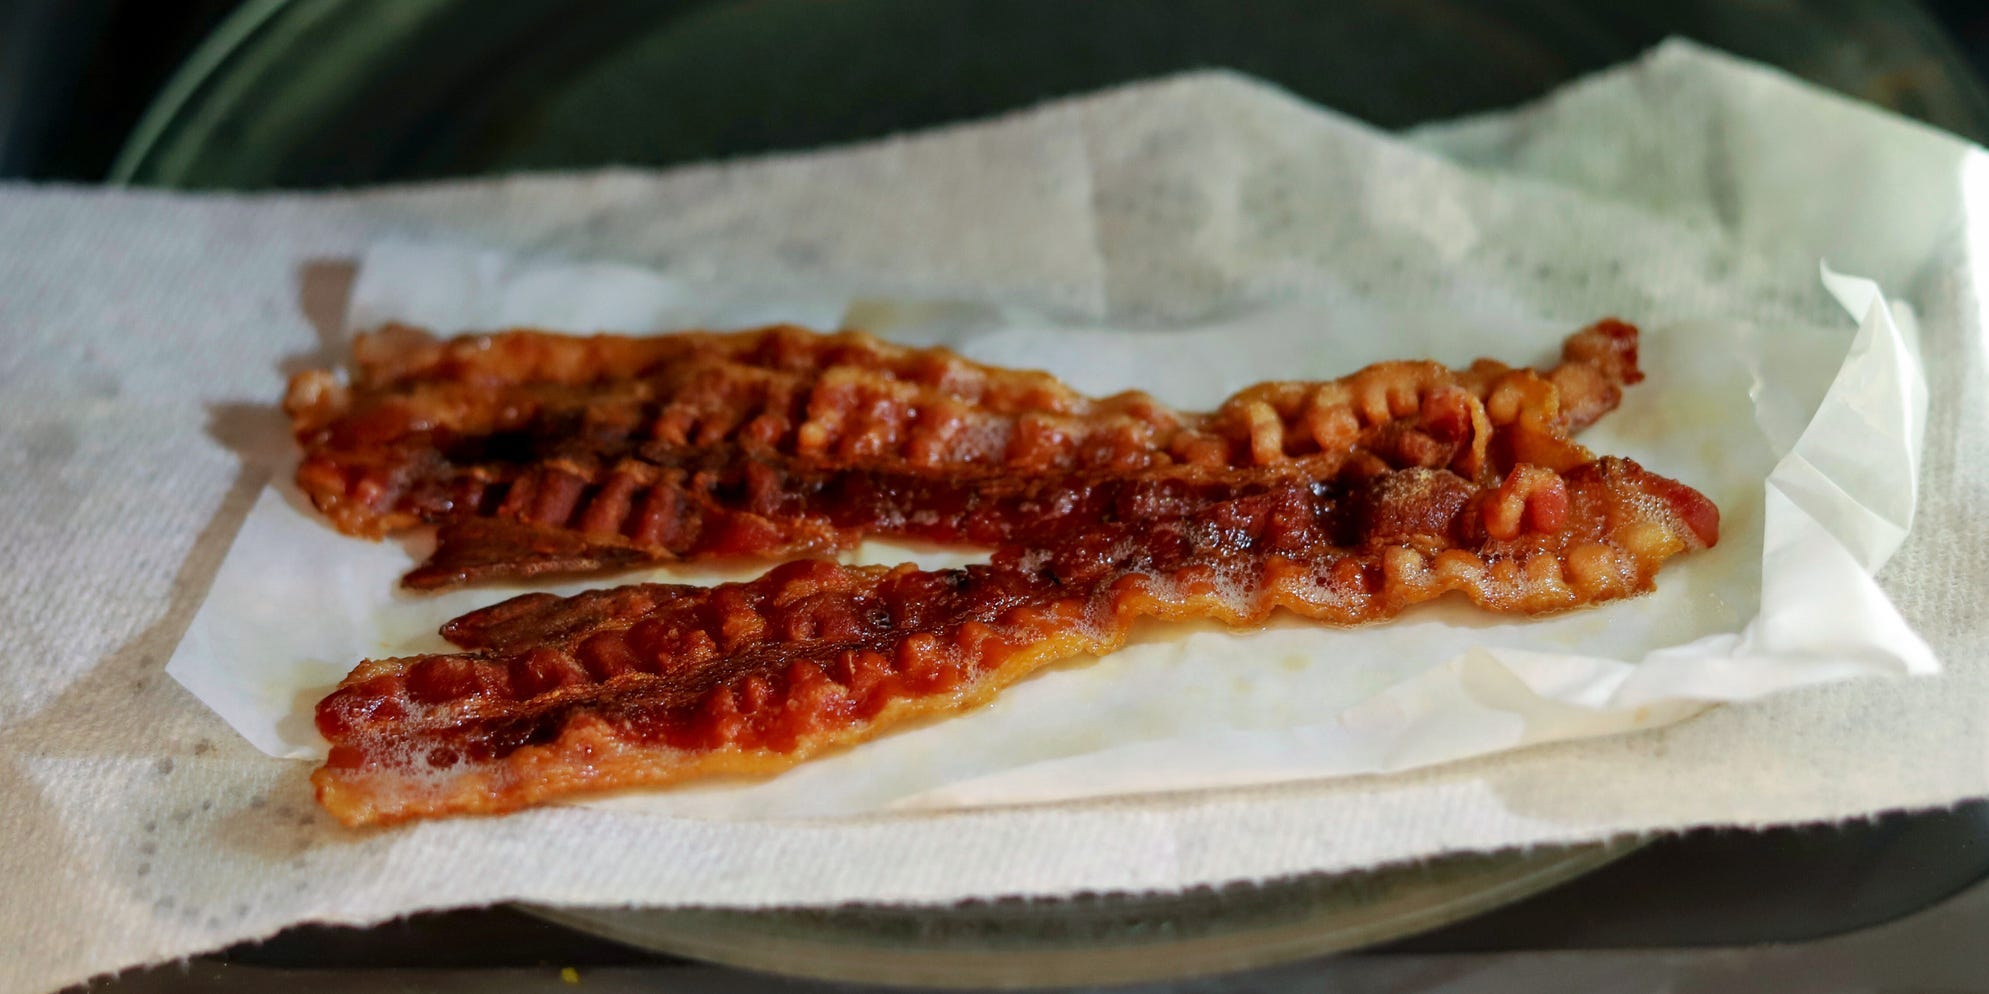 Pieces of bacon on a paper towel.